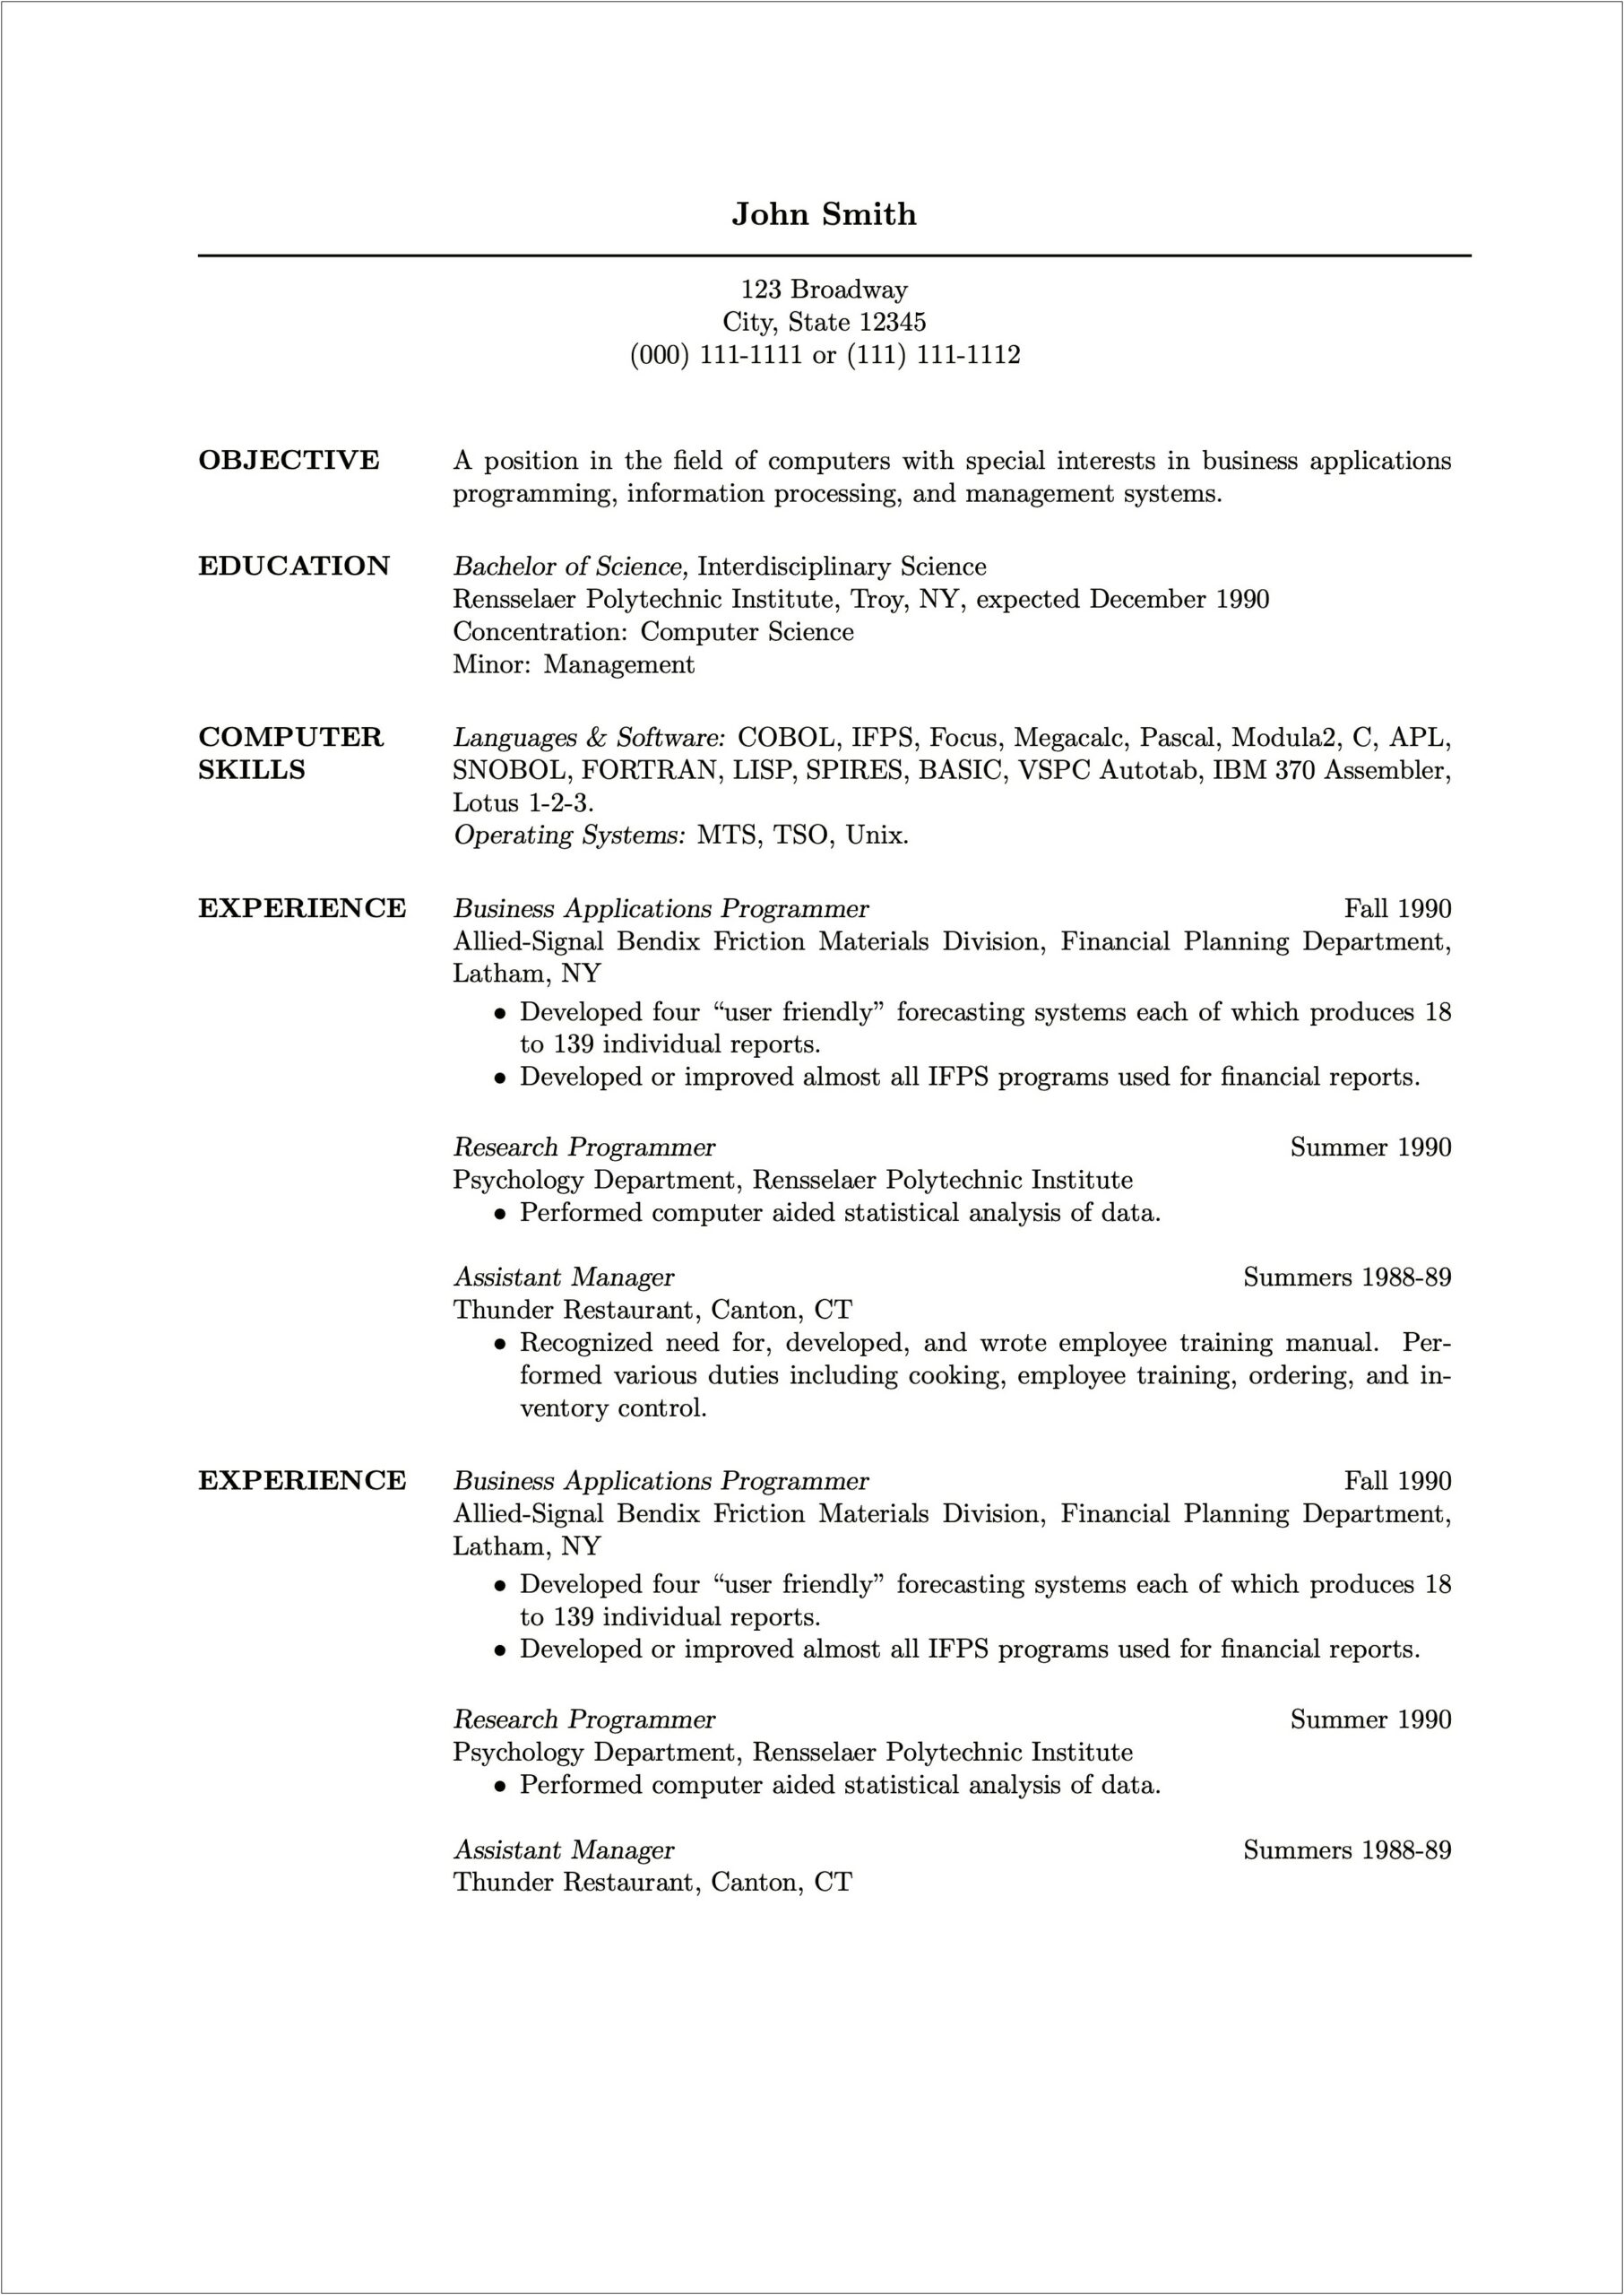 Resume Sample For Fresh Graduate Without Experience Pdf